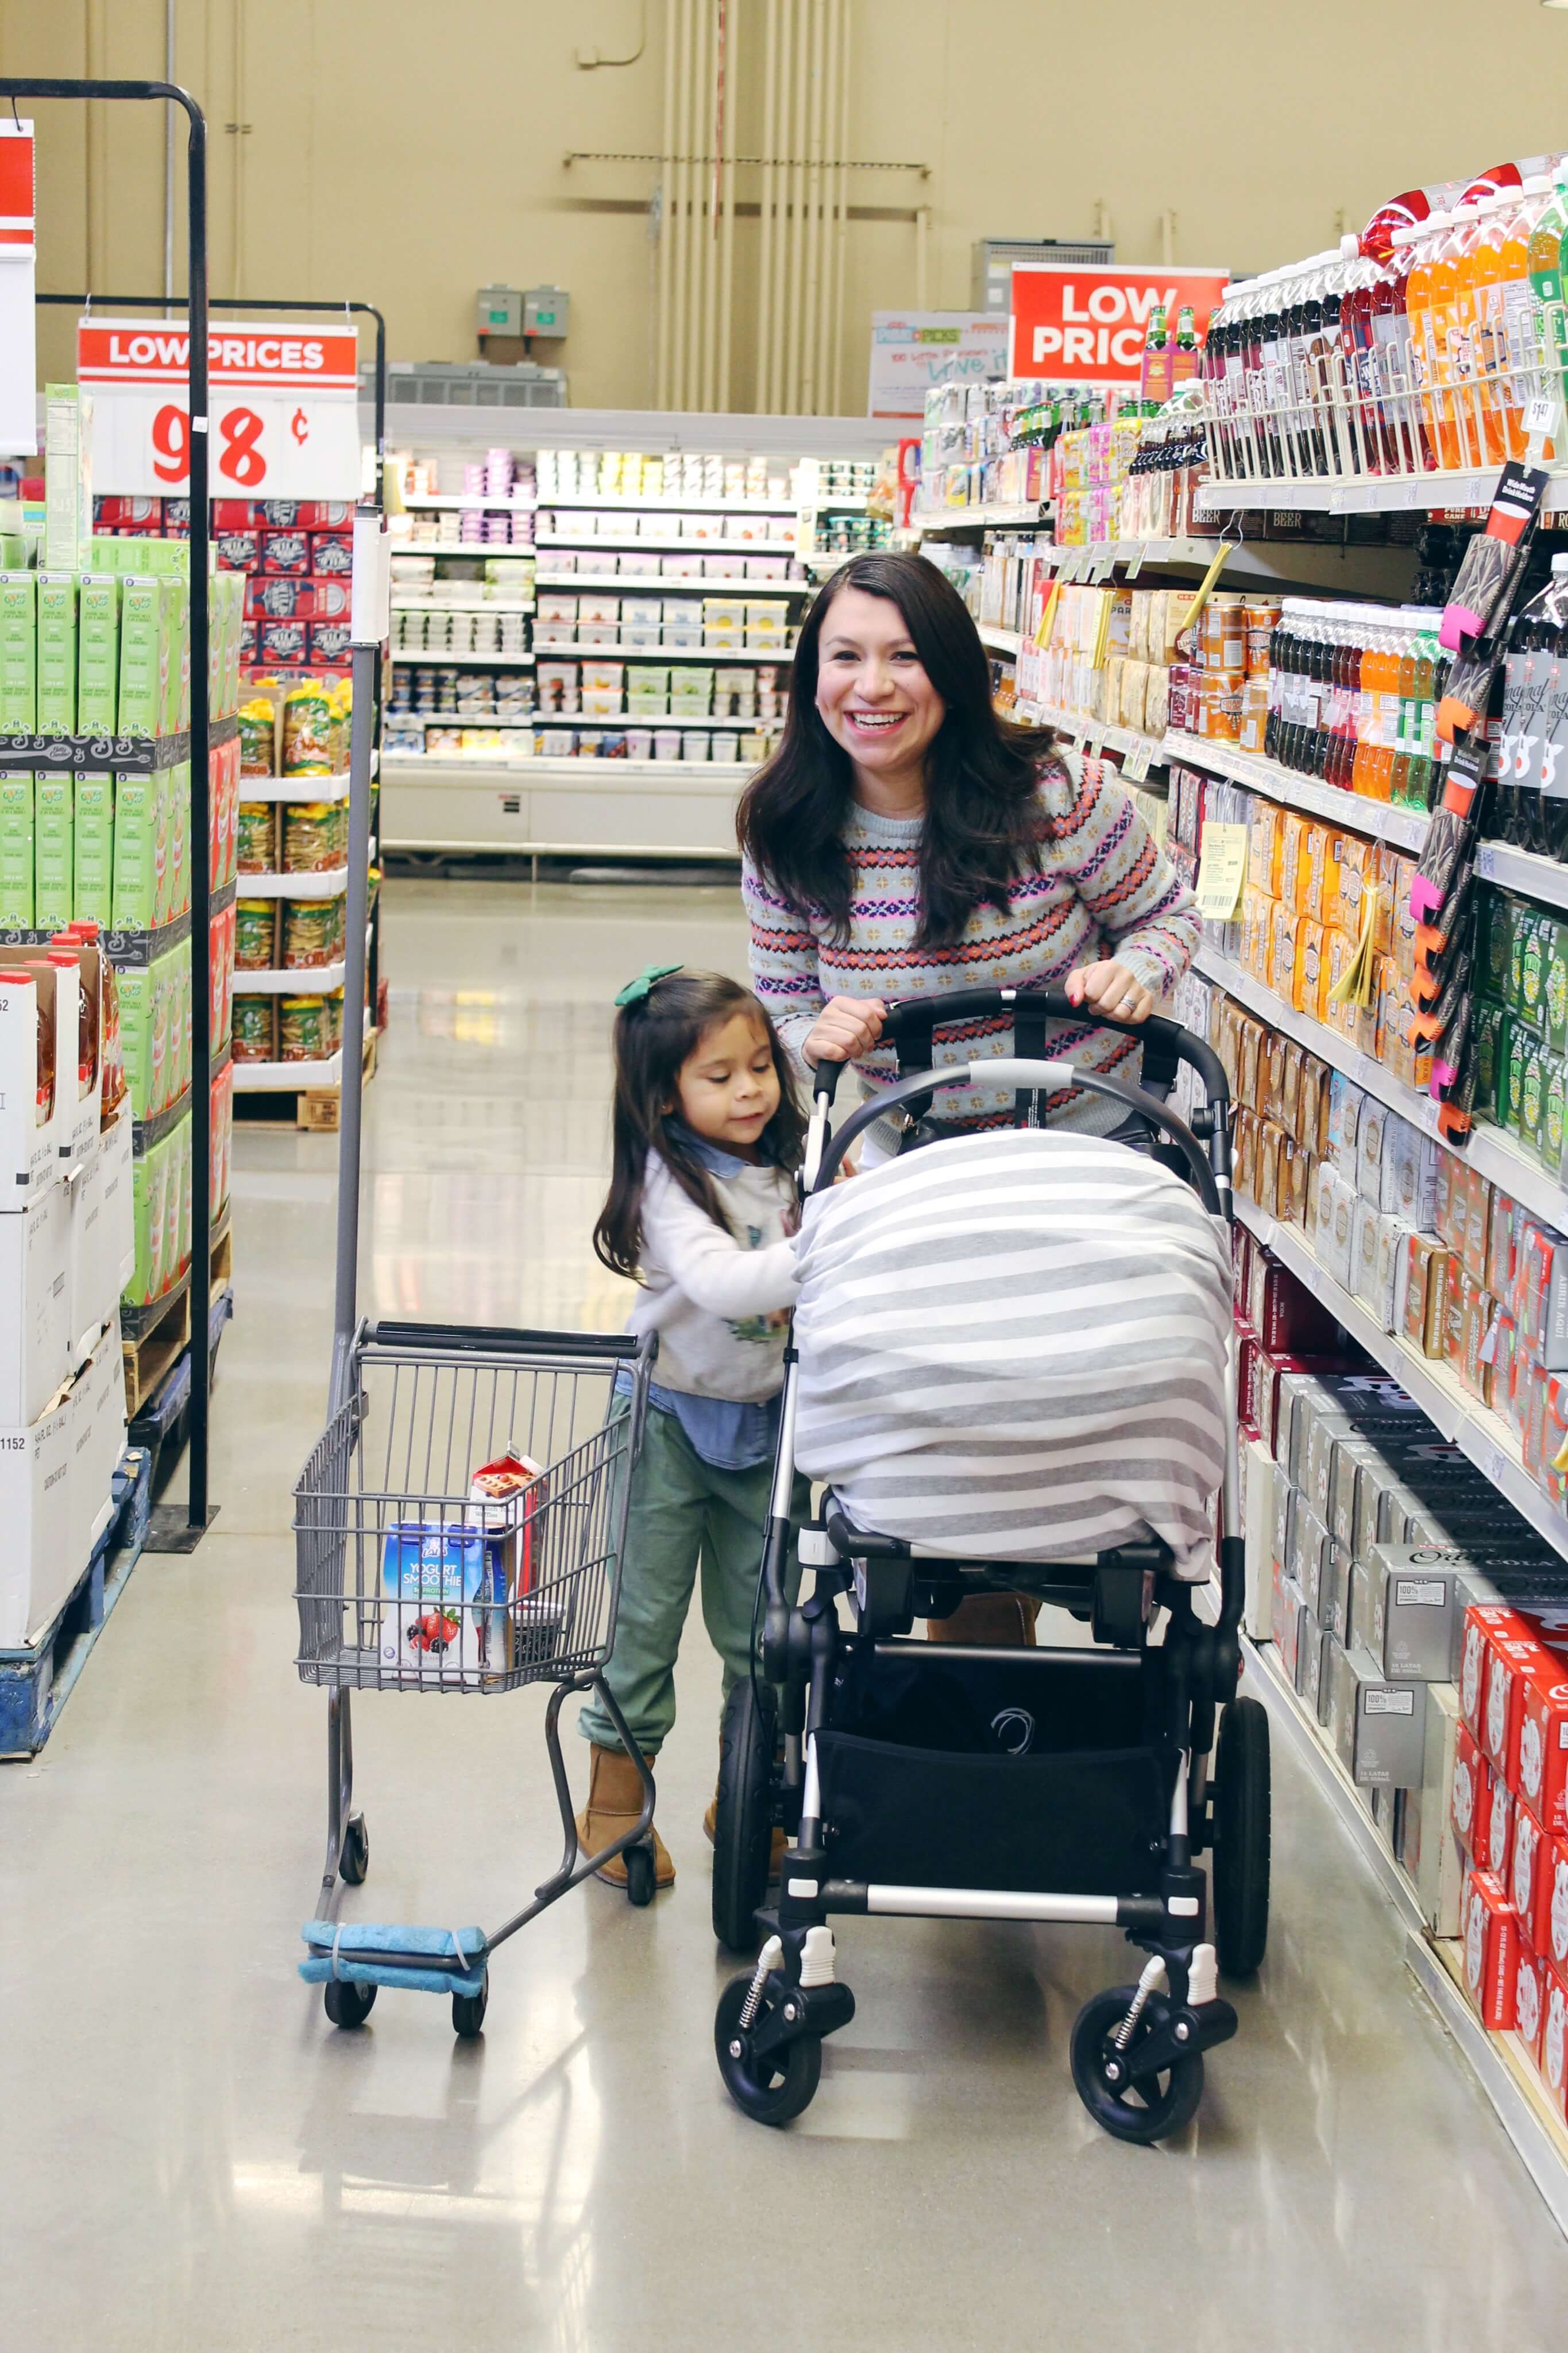 Mom on the go? Here's how to take care of yourself. 